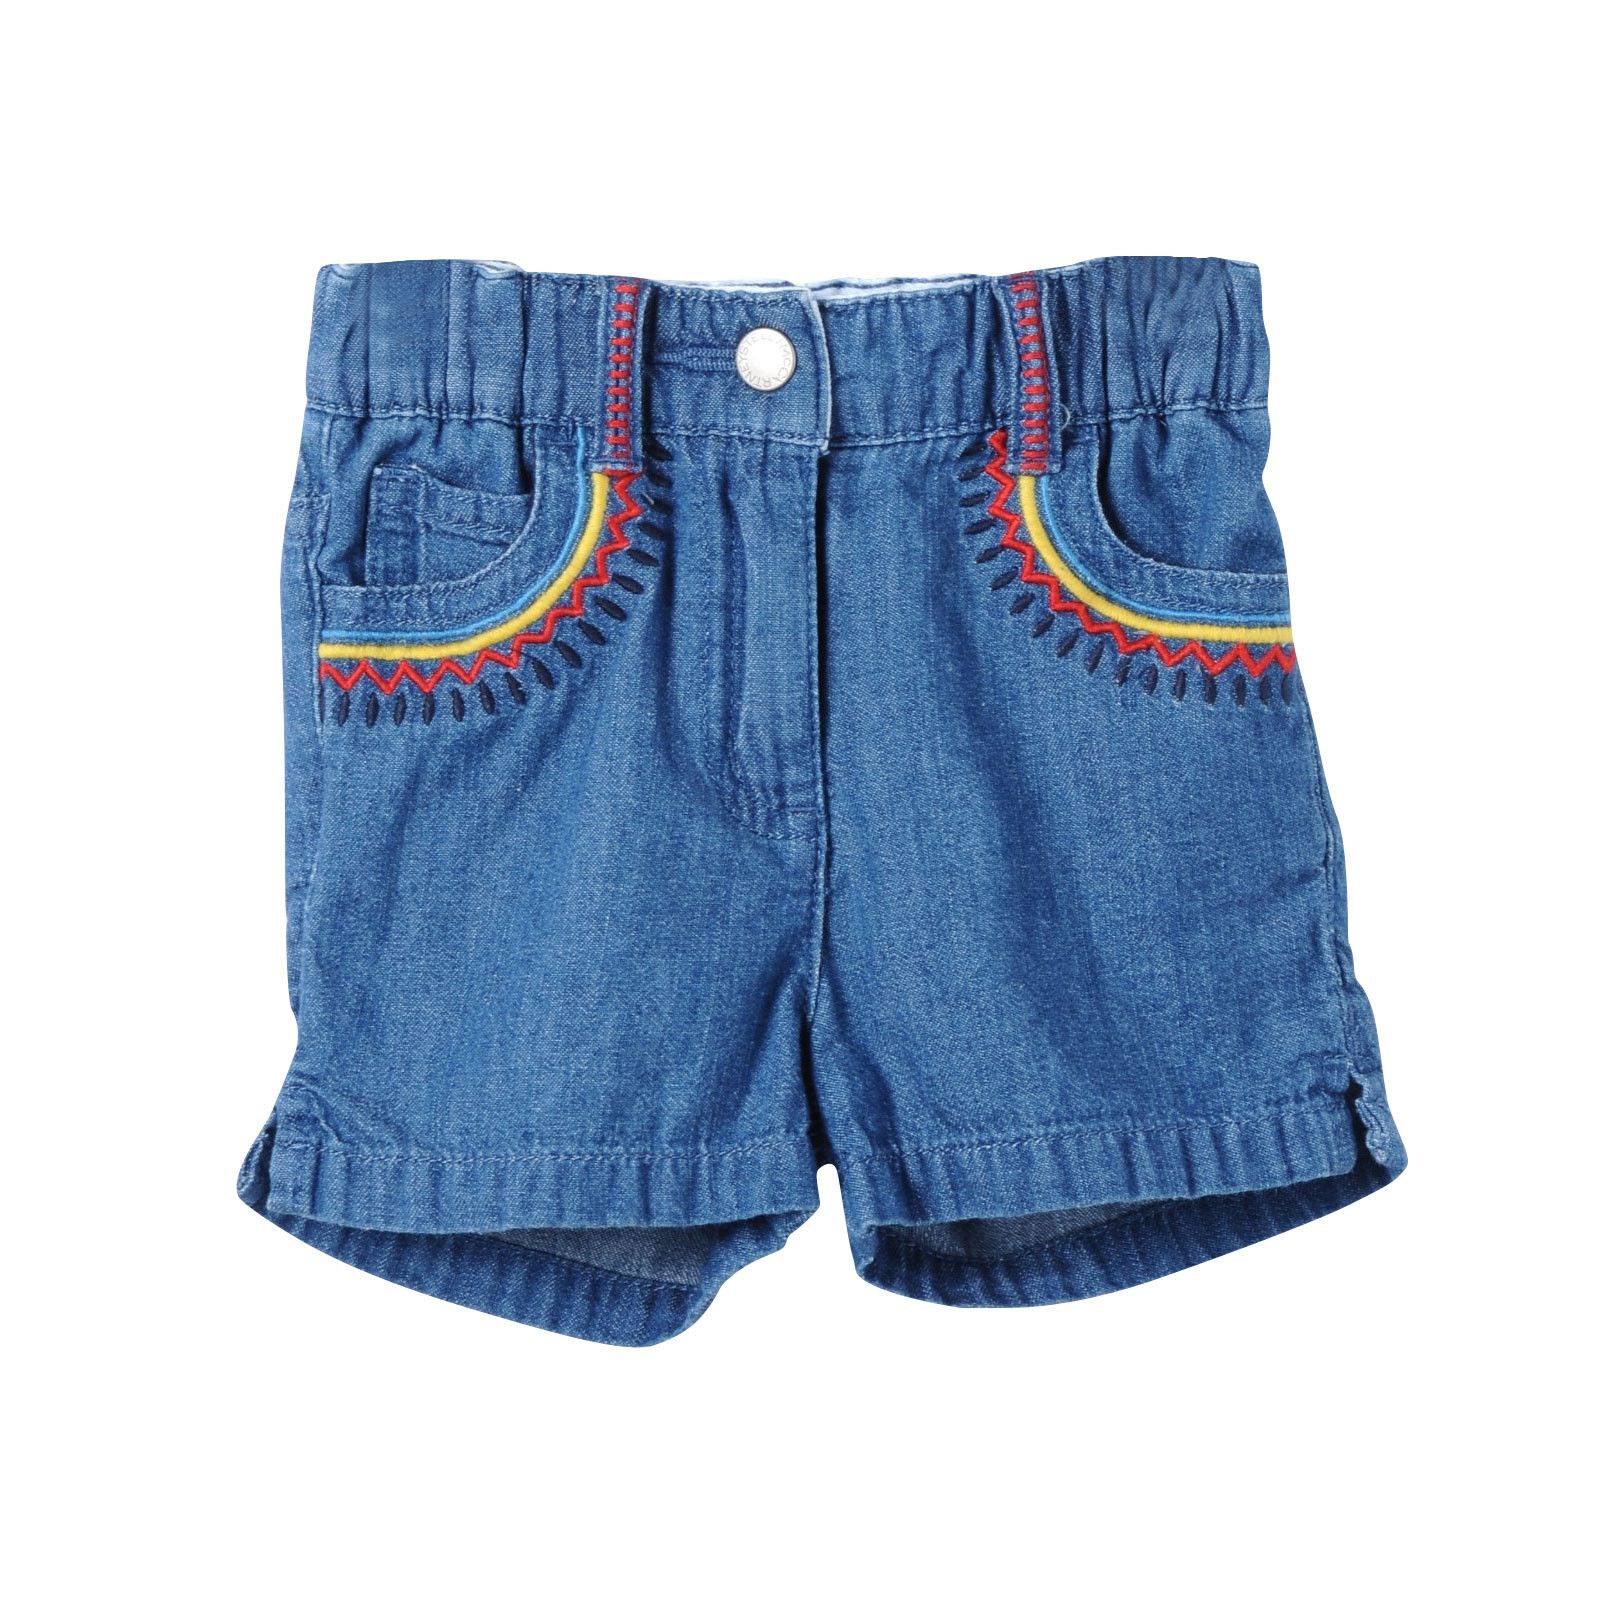 Girls Blue Shorts With Colorful Zig Zag Embroidered Trims - CÉMAROSE | Children's Fashion Store - 1